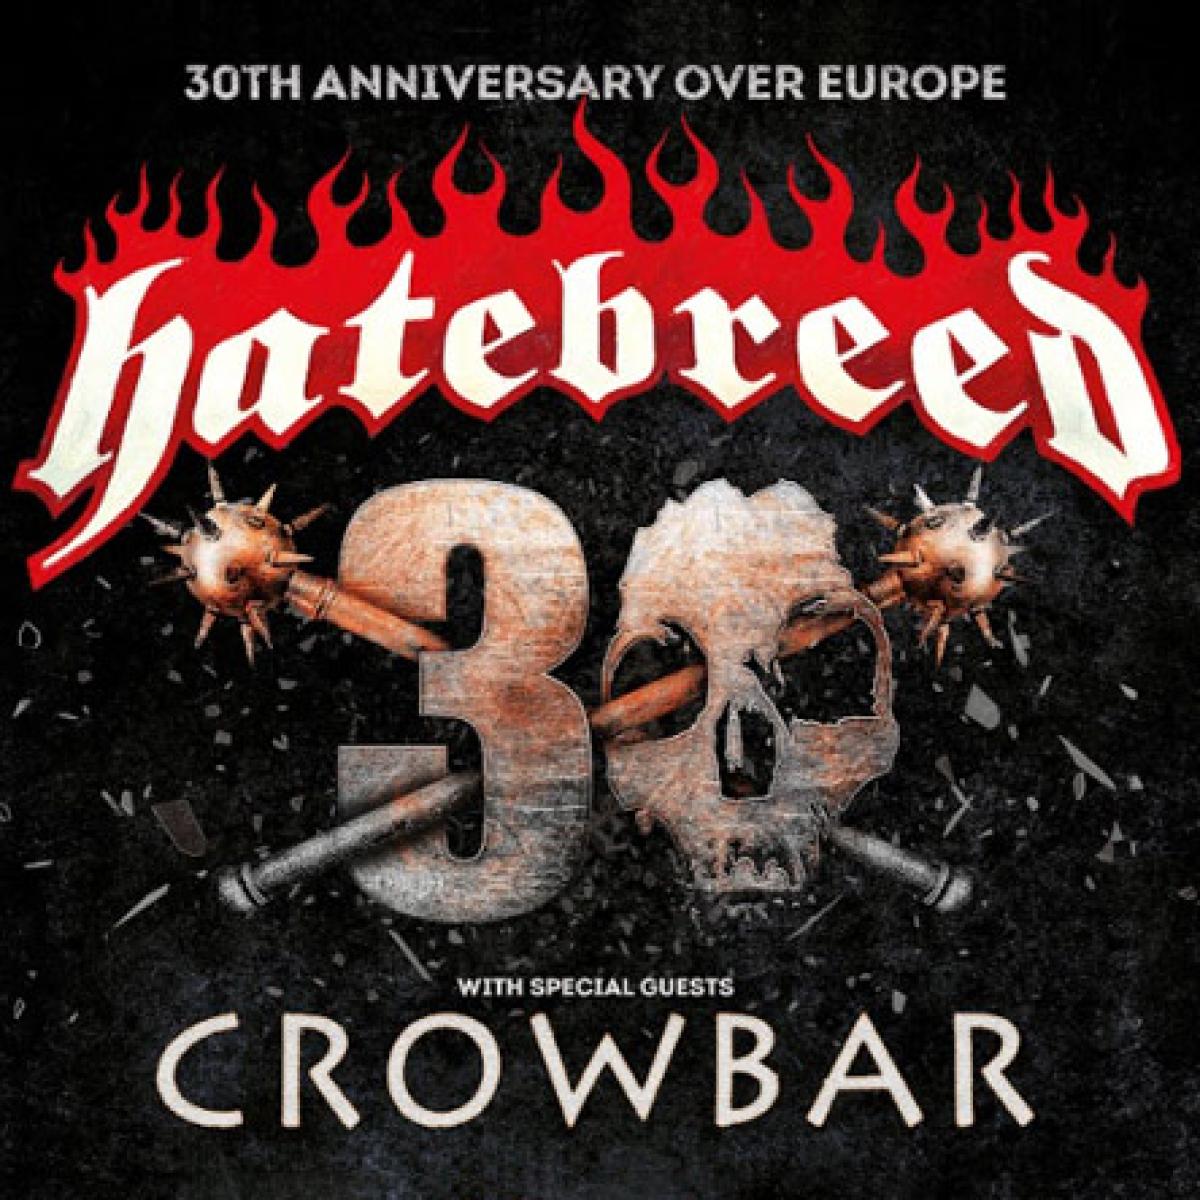 Hatebreed - Crowbar - 30th Anniversary Over Europe at Arena Wien Tickets